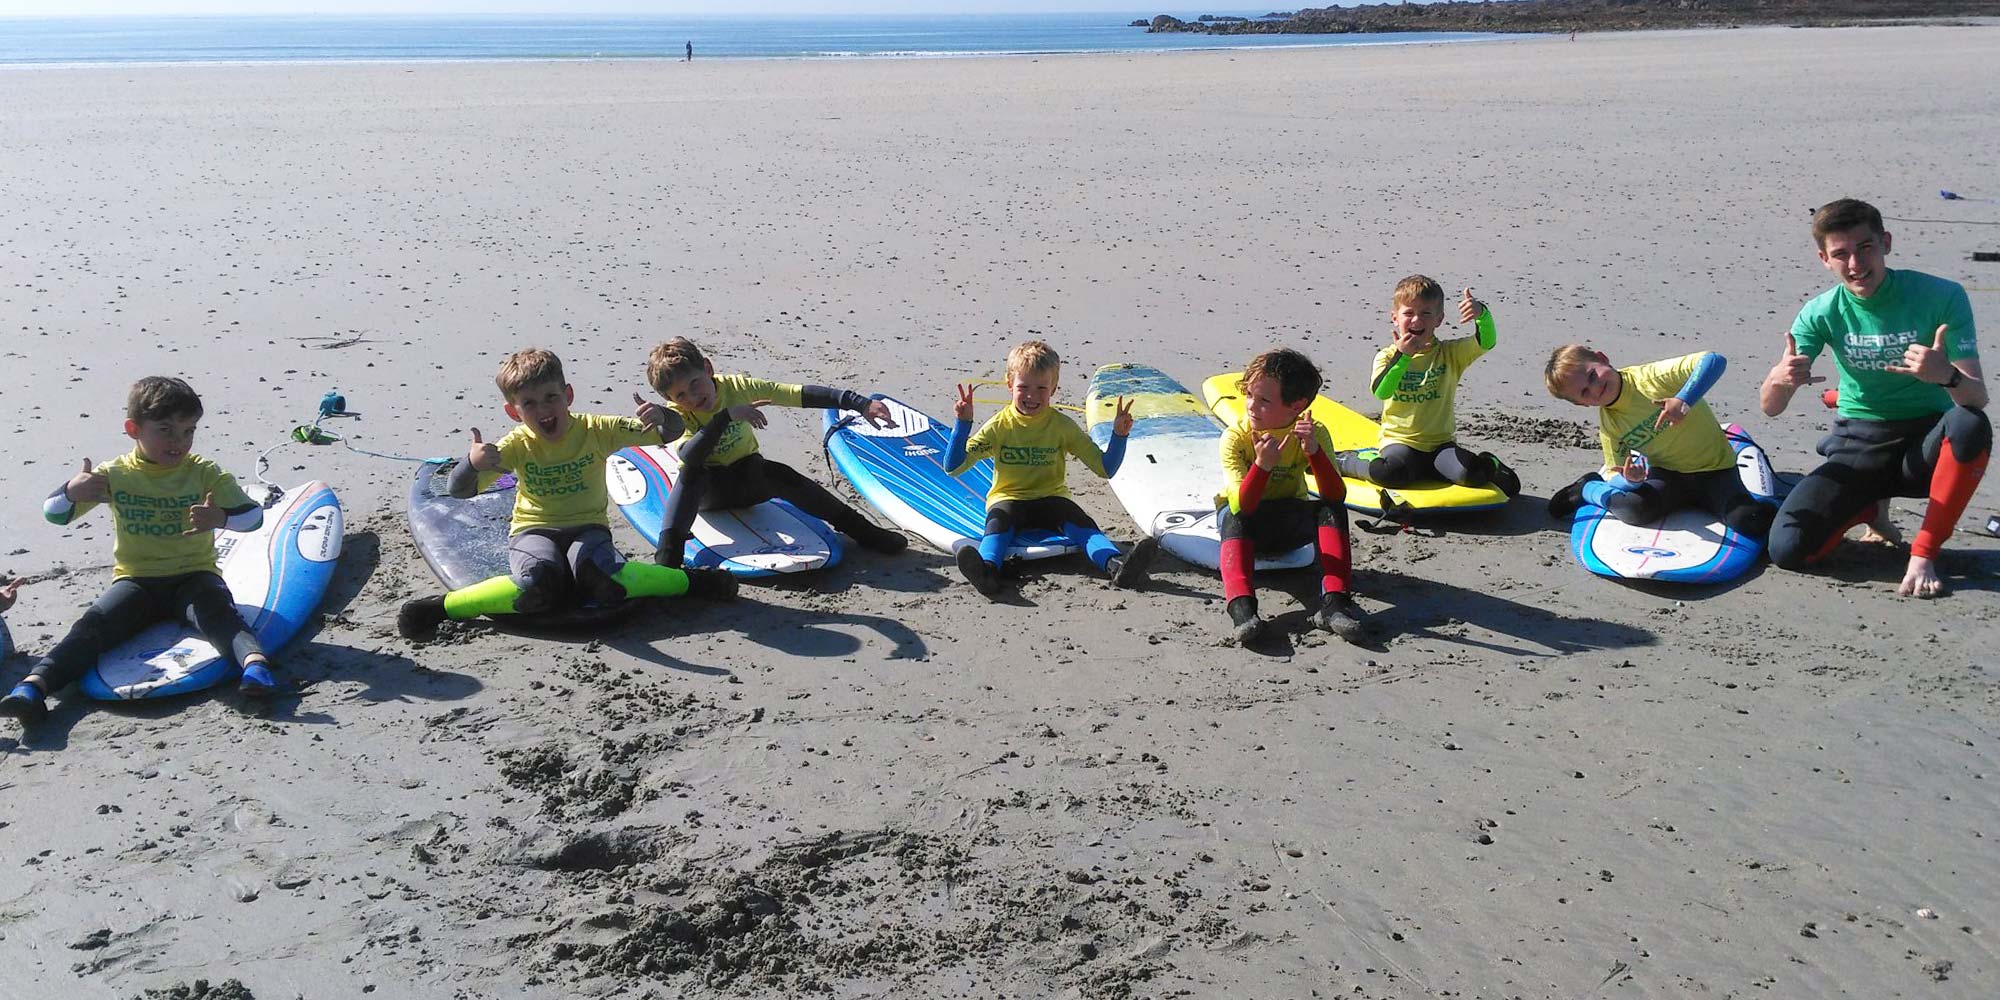 September and October sessions with the Guernsey Surf School